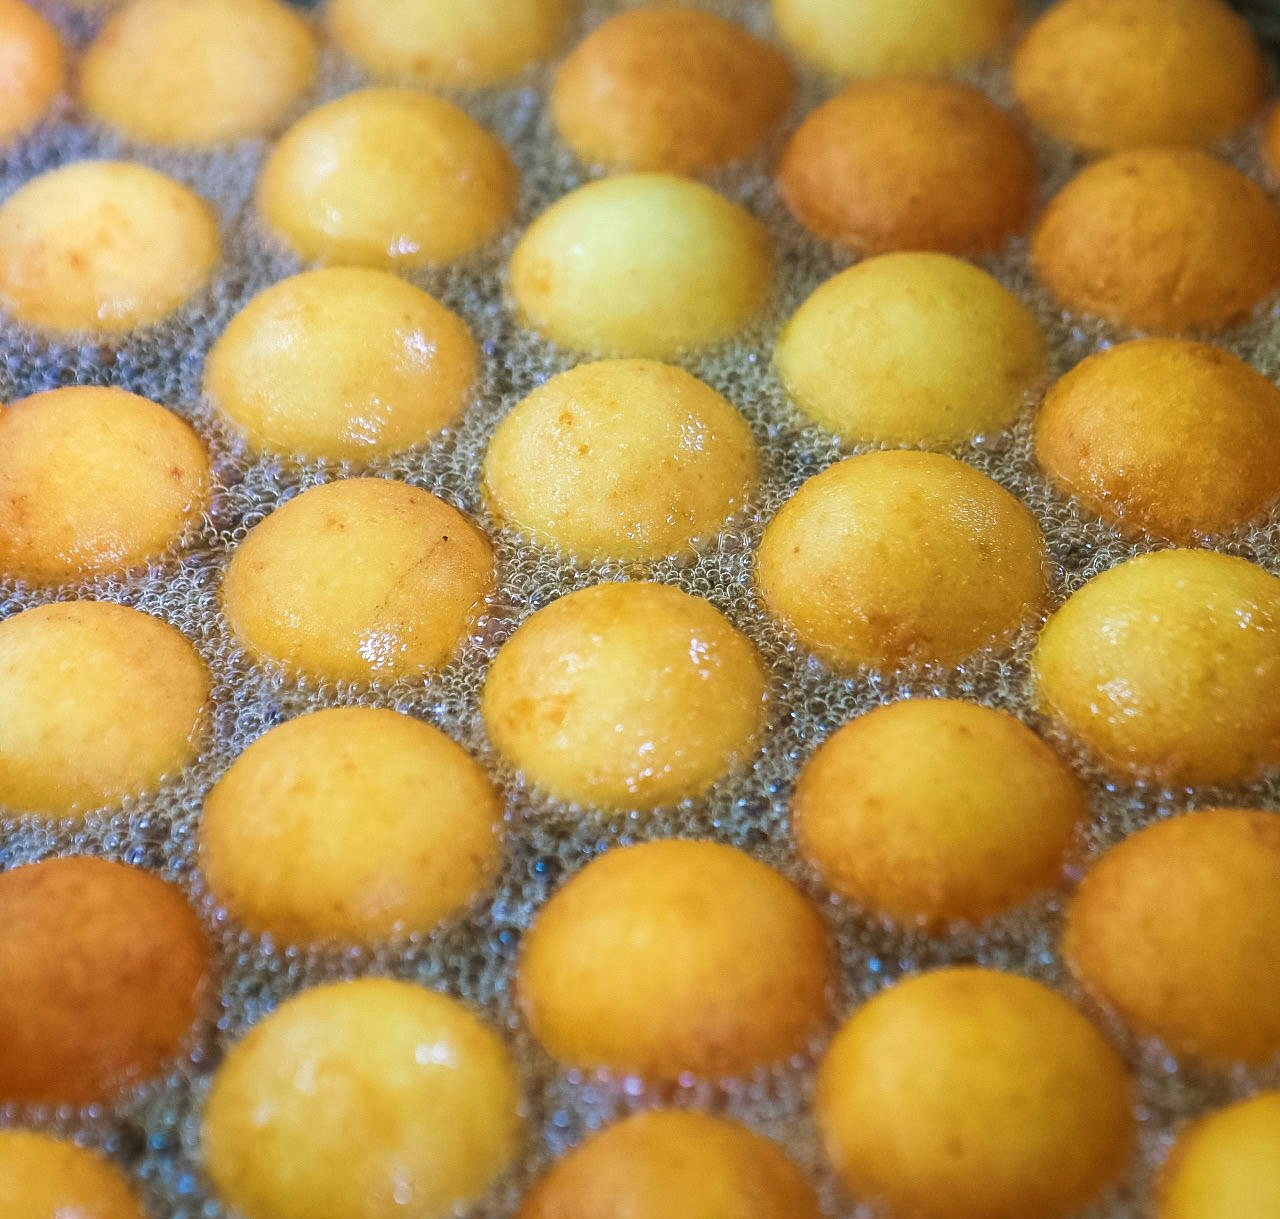 Piping hot bunuelos sit in a bath of bubbling oil. Each bunuelo is a round, pale yellow sphere (some darkening into brown) surrounded by tiny white and clear bubbles.